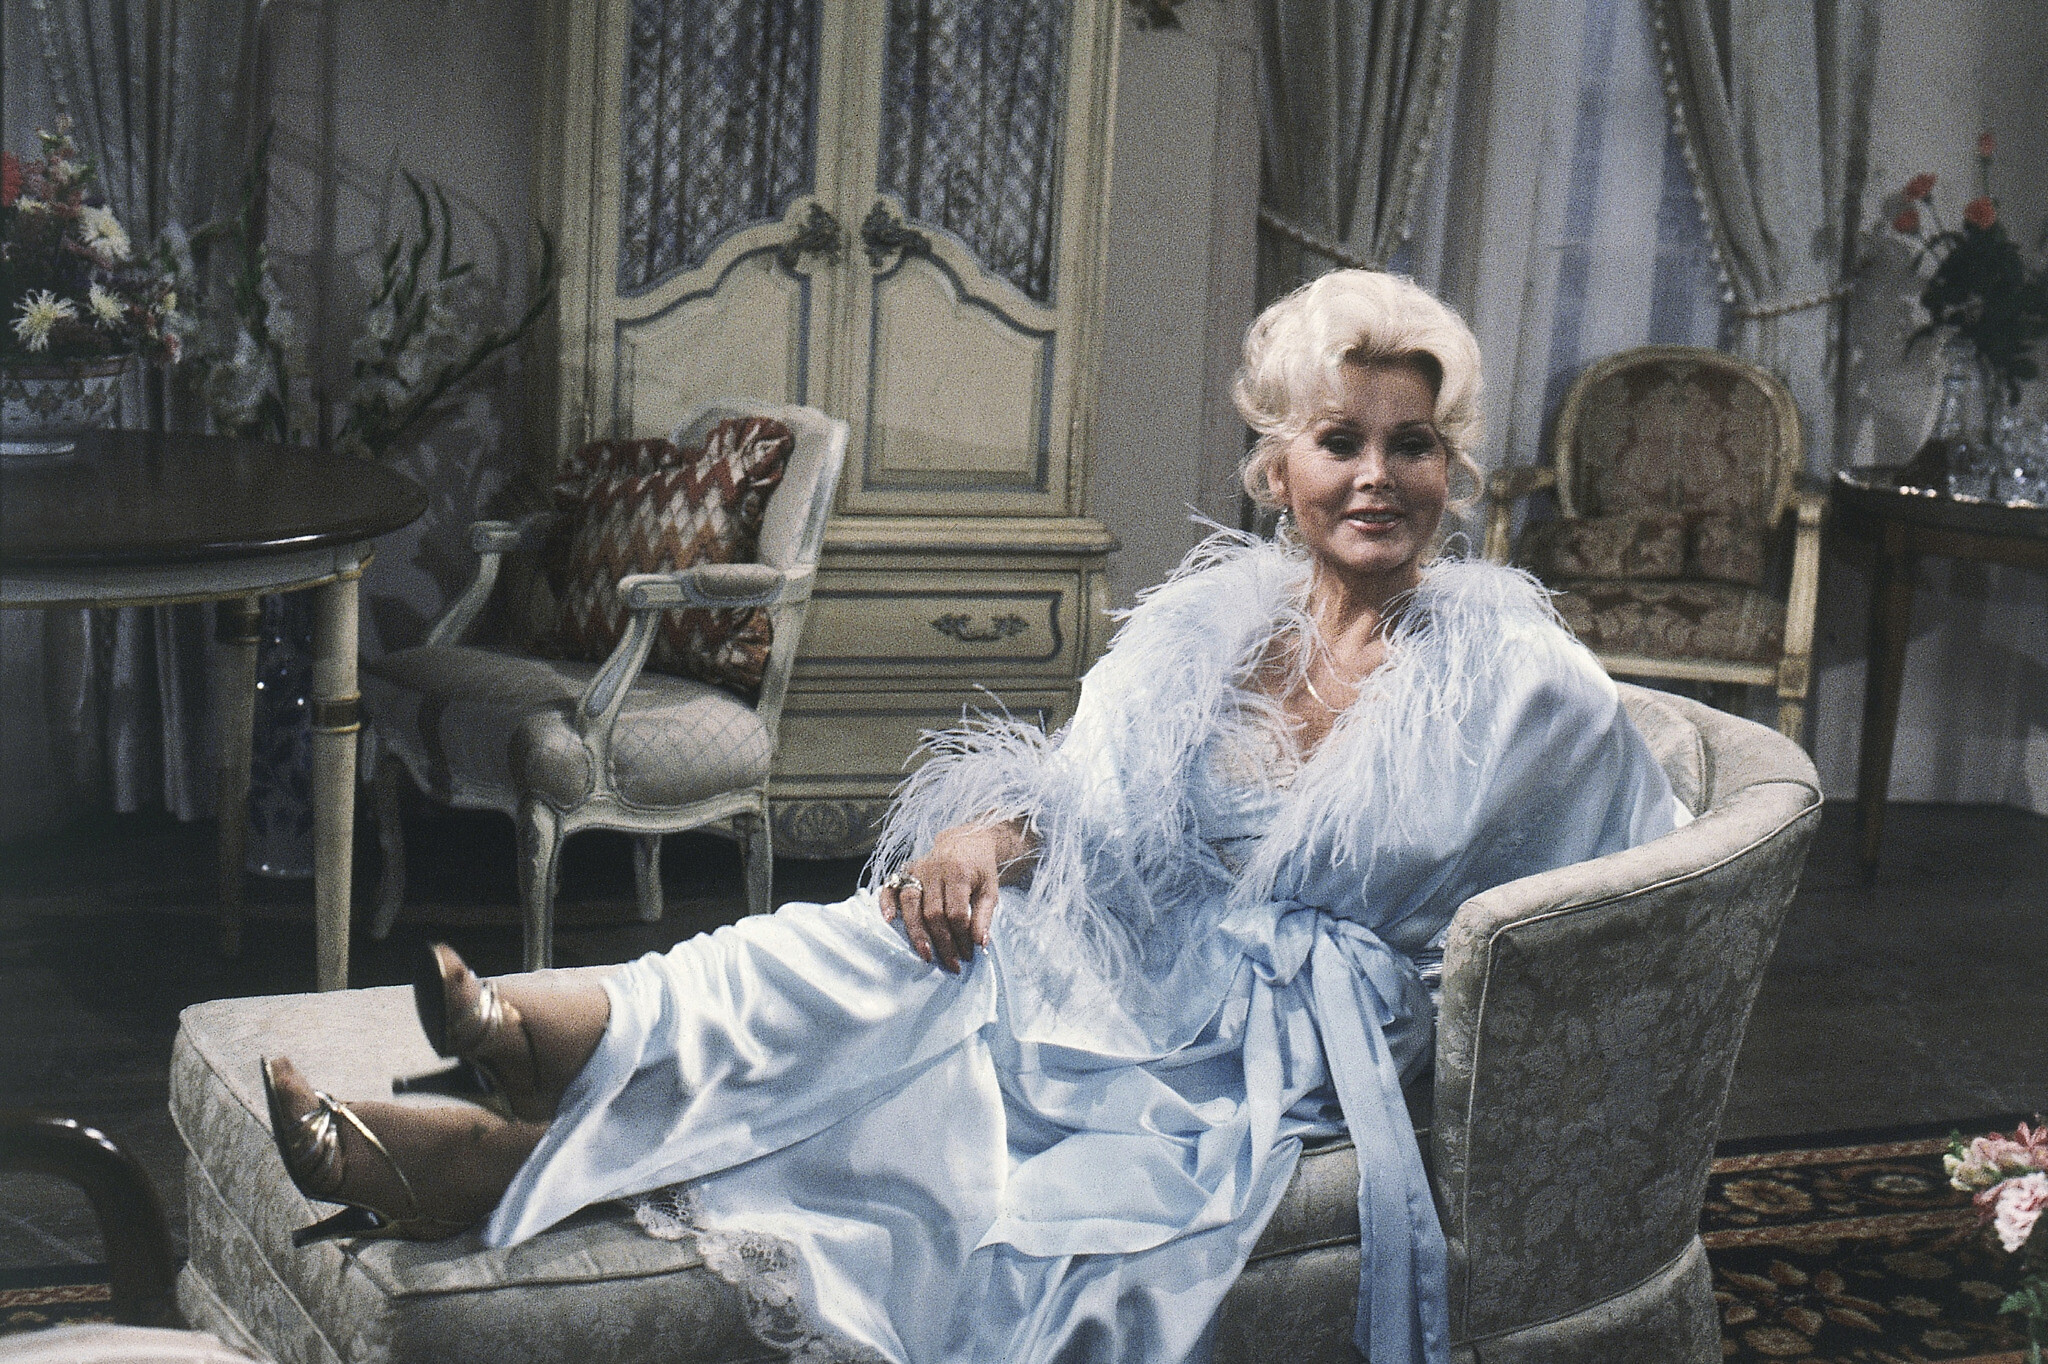 Zsa Zsa Gabor's ashes make fashionably late return to for burial | The Times of Israel